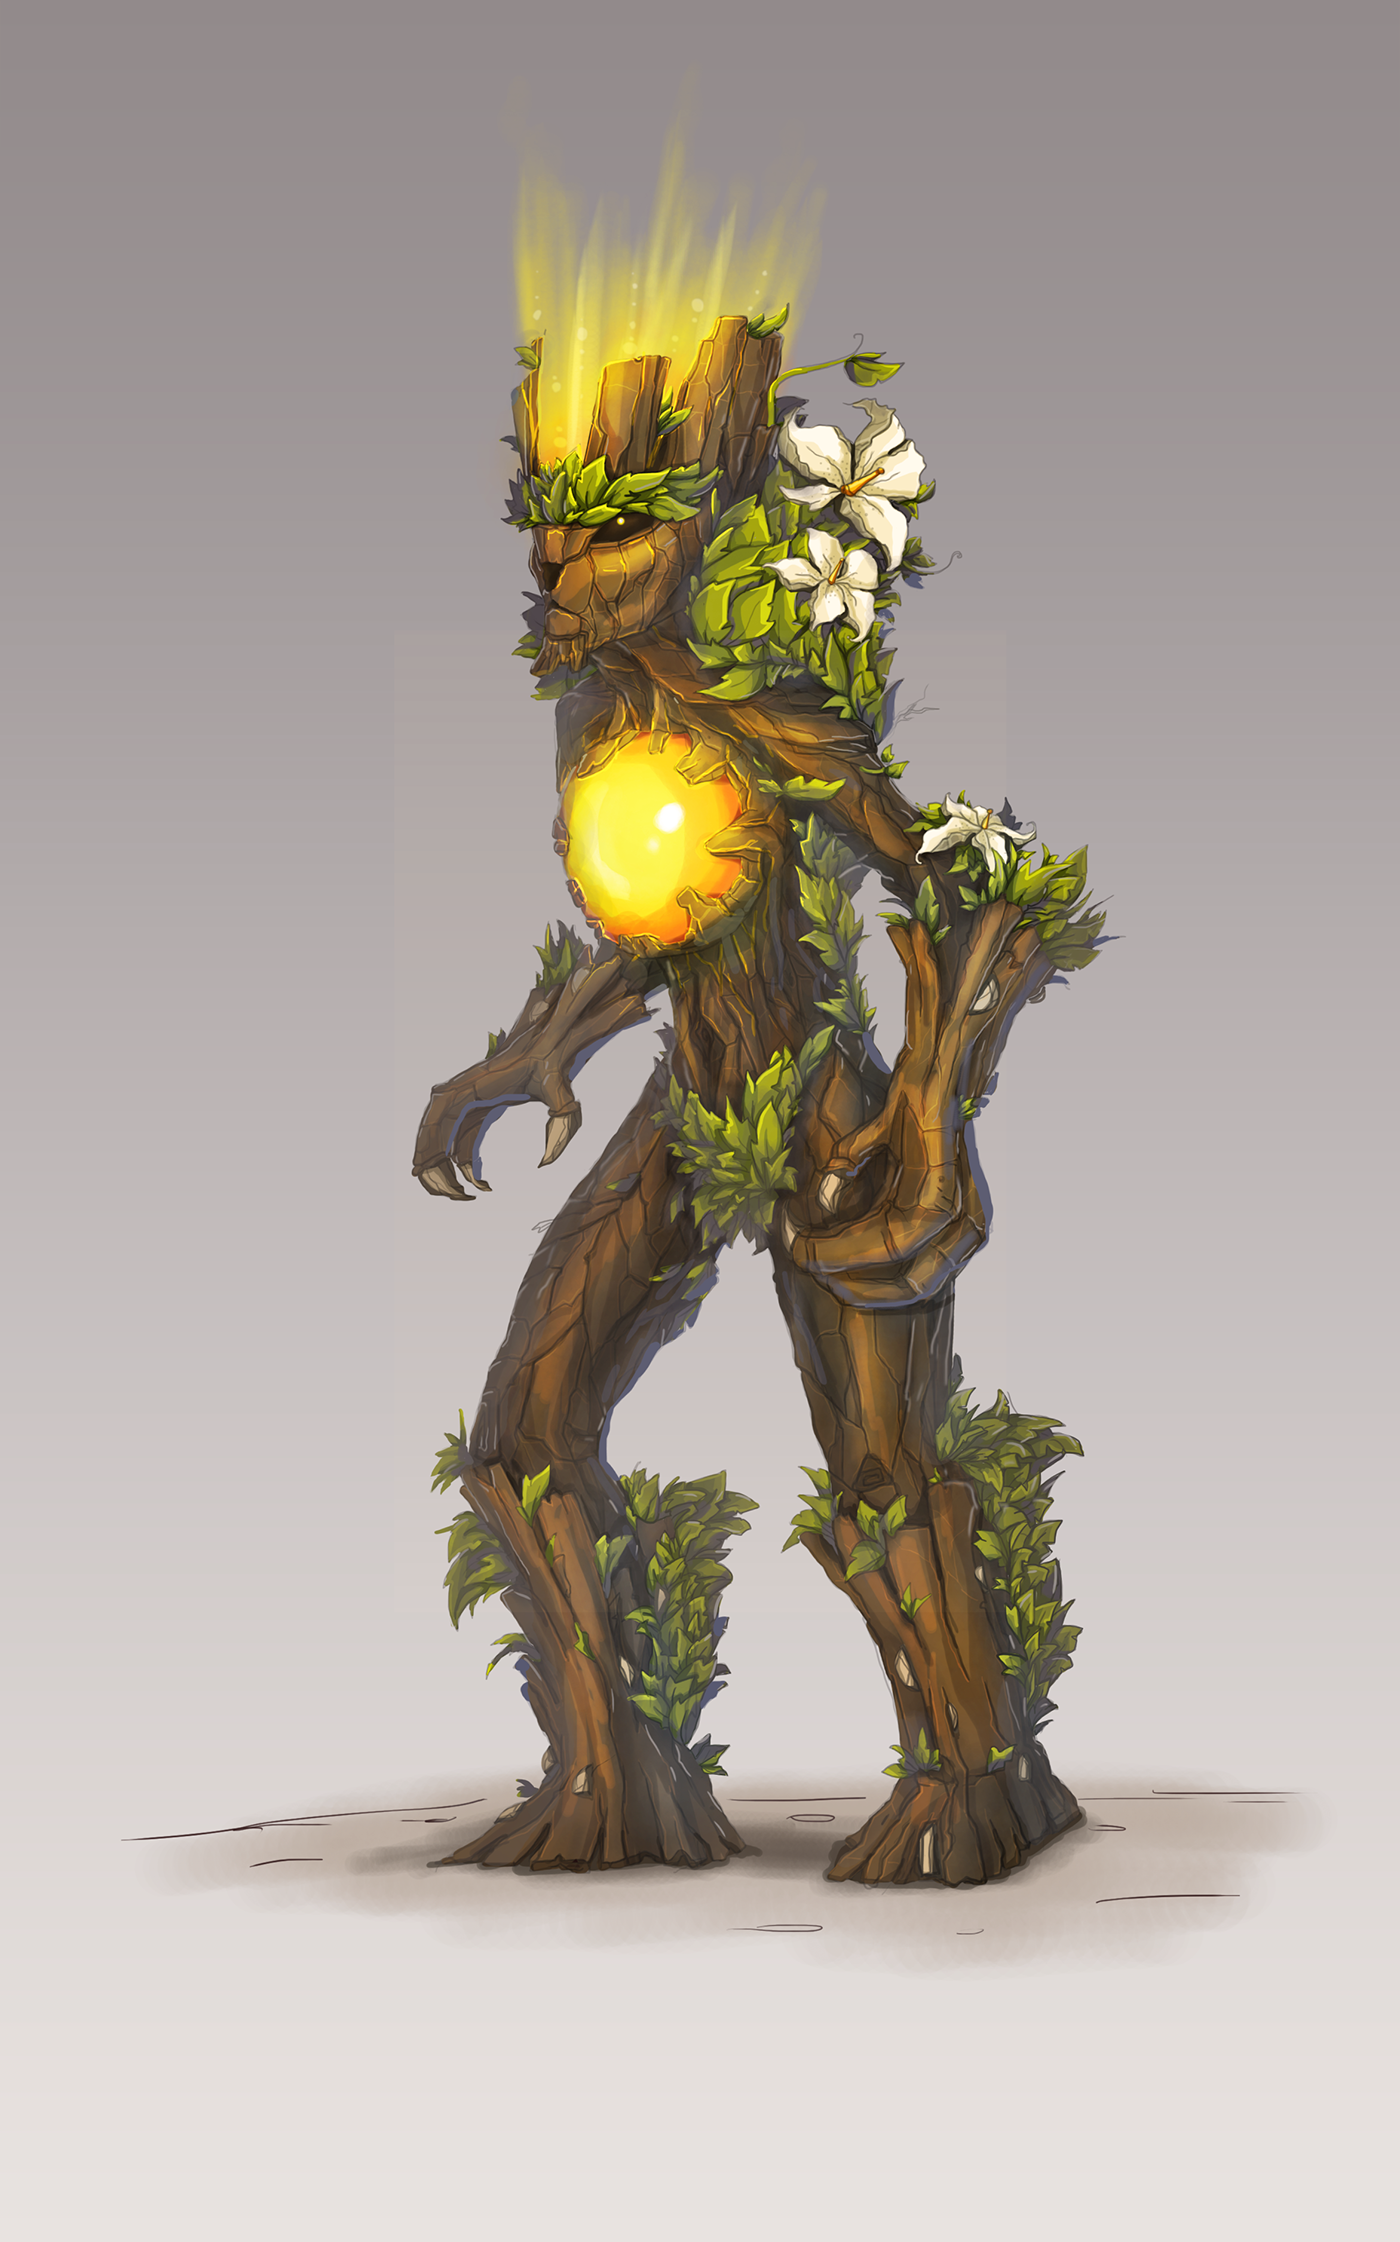 game dryad forest man body plants Character match3 sweet Candy